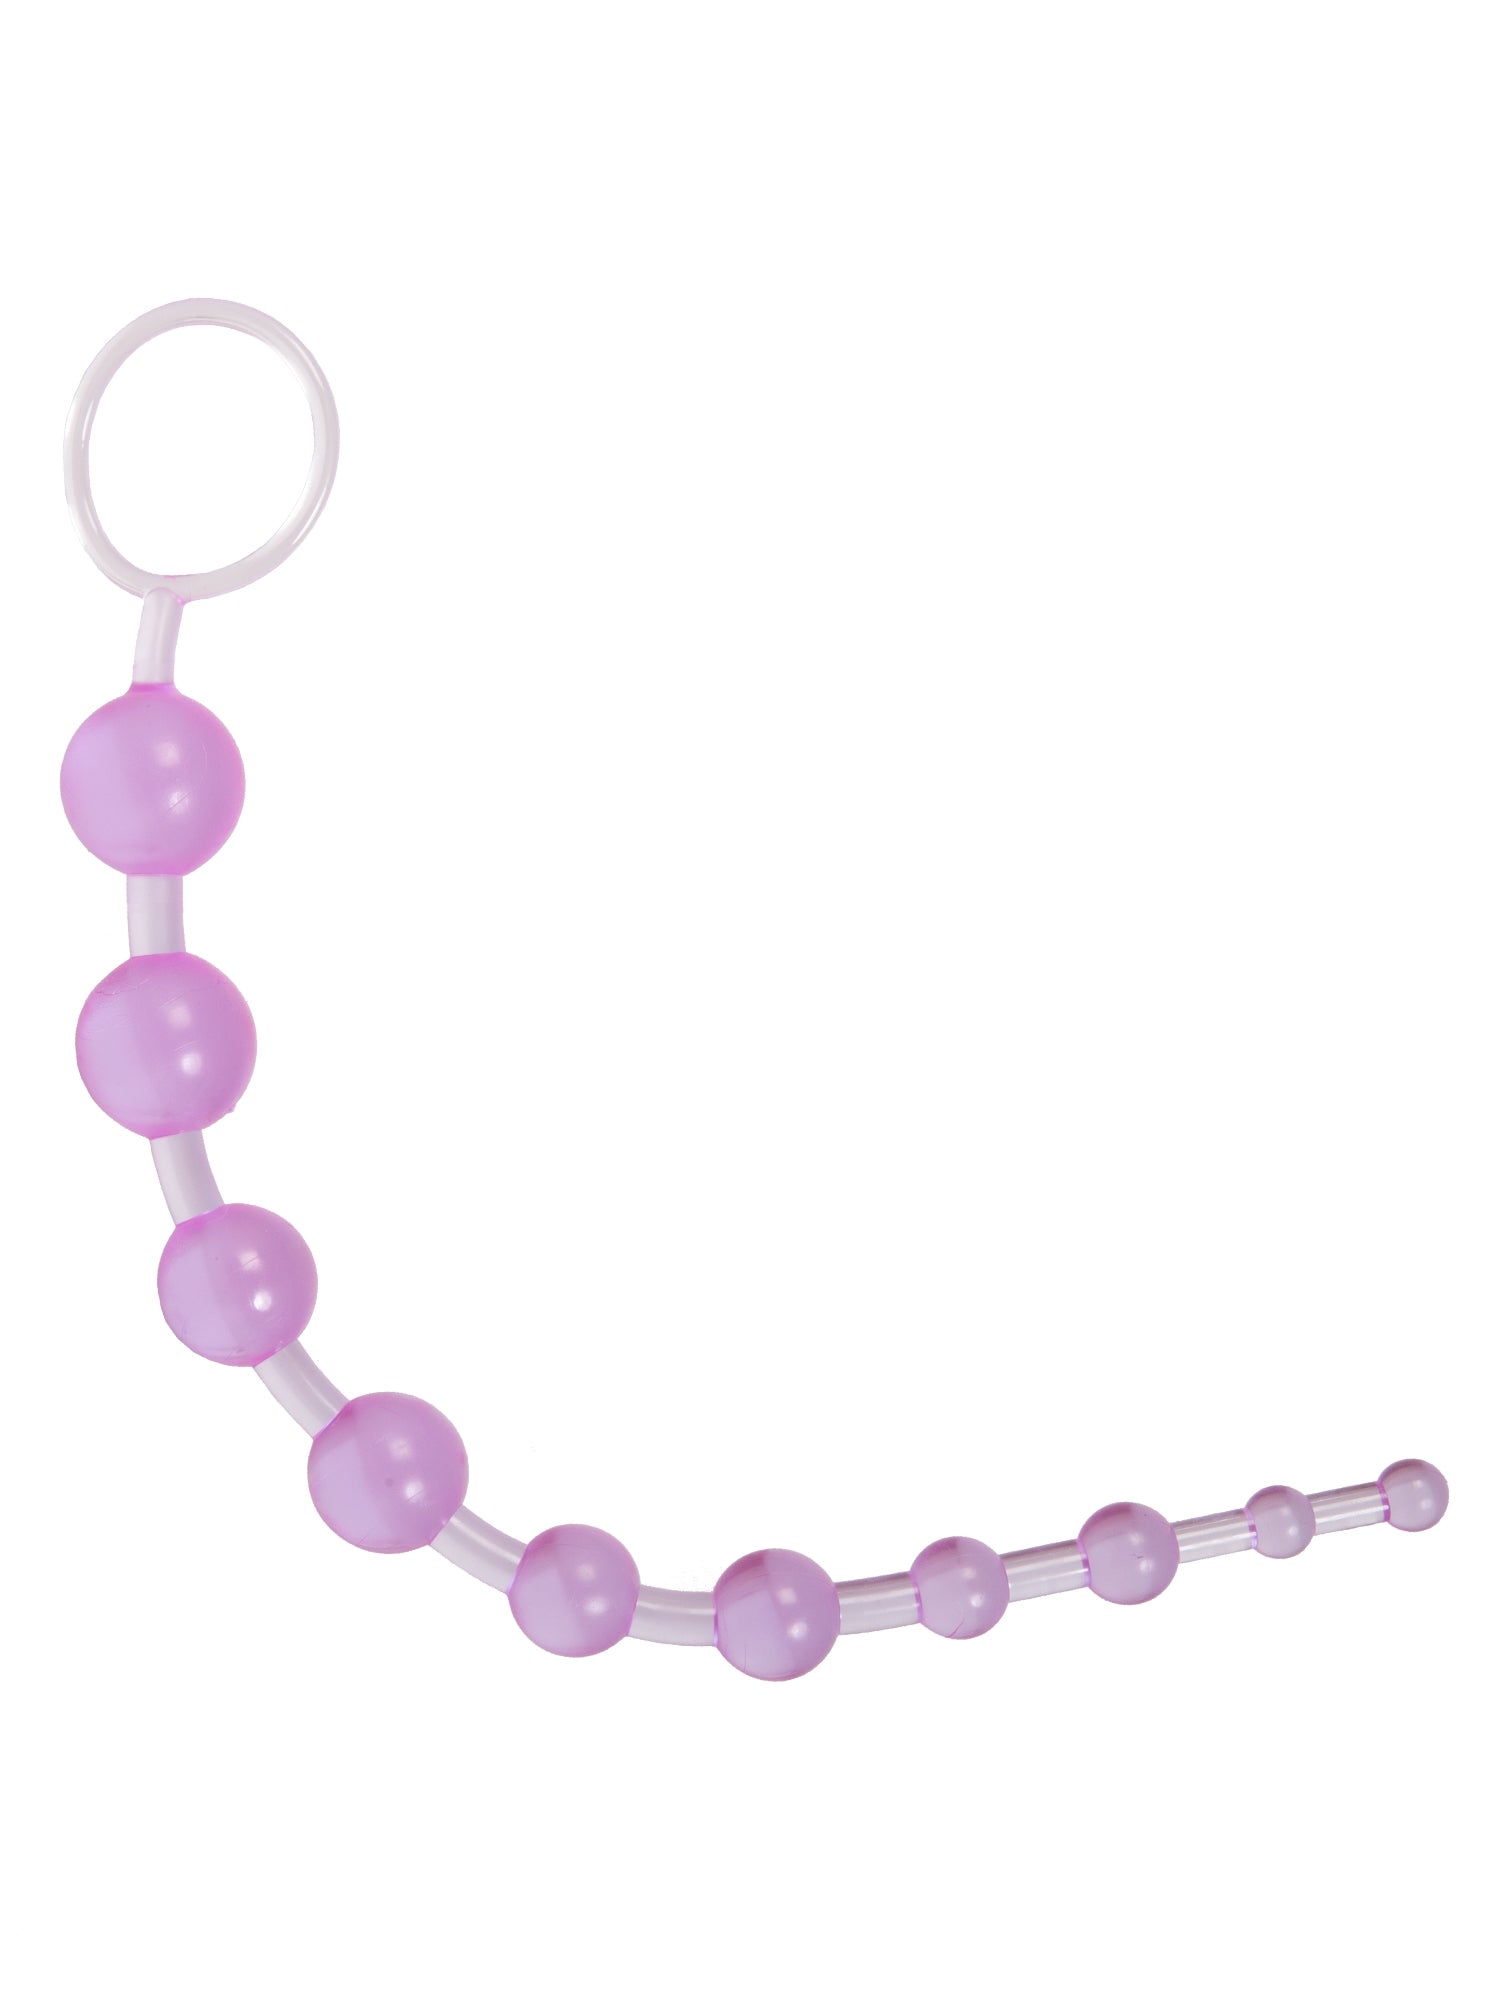 Dropship X 10 Beads Graduated Anal Beads 11 Inch - Purple to Sell